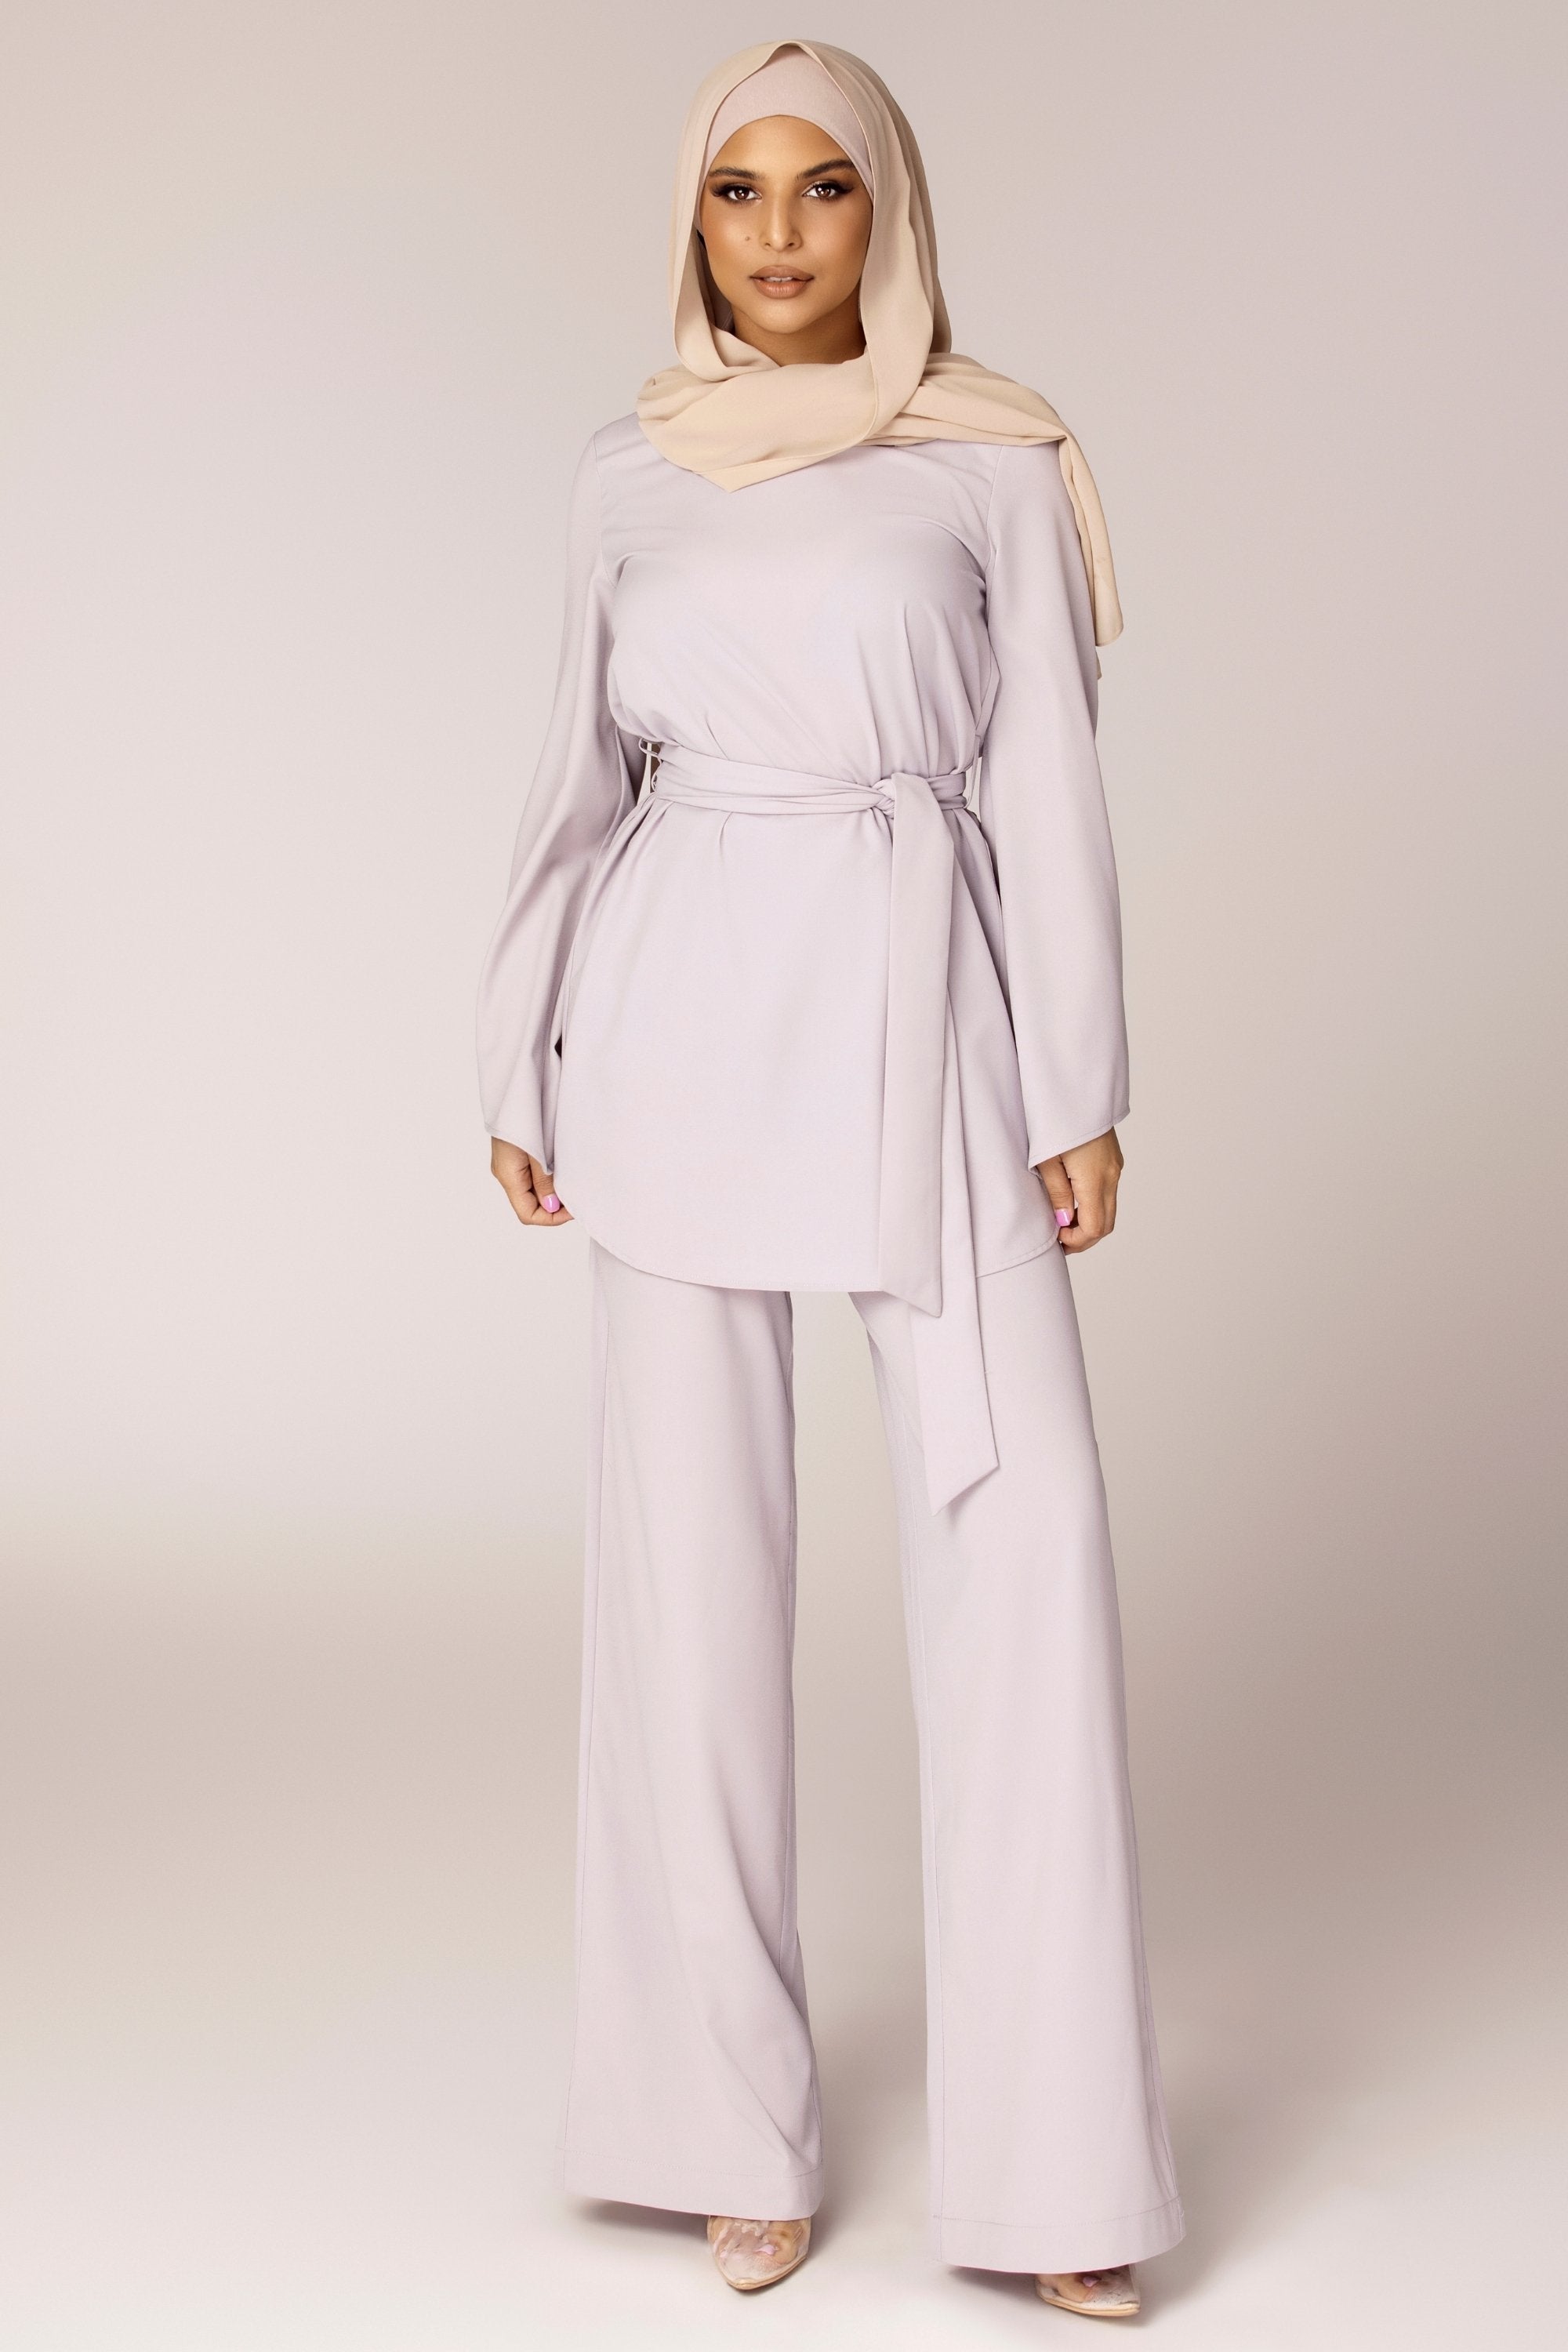 Nadia Everyday Belted Tunic - Dusty Blue Veiled Collection 